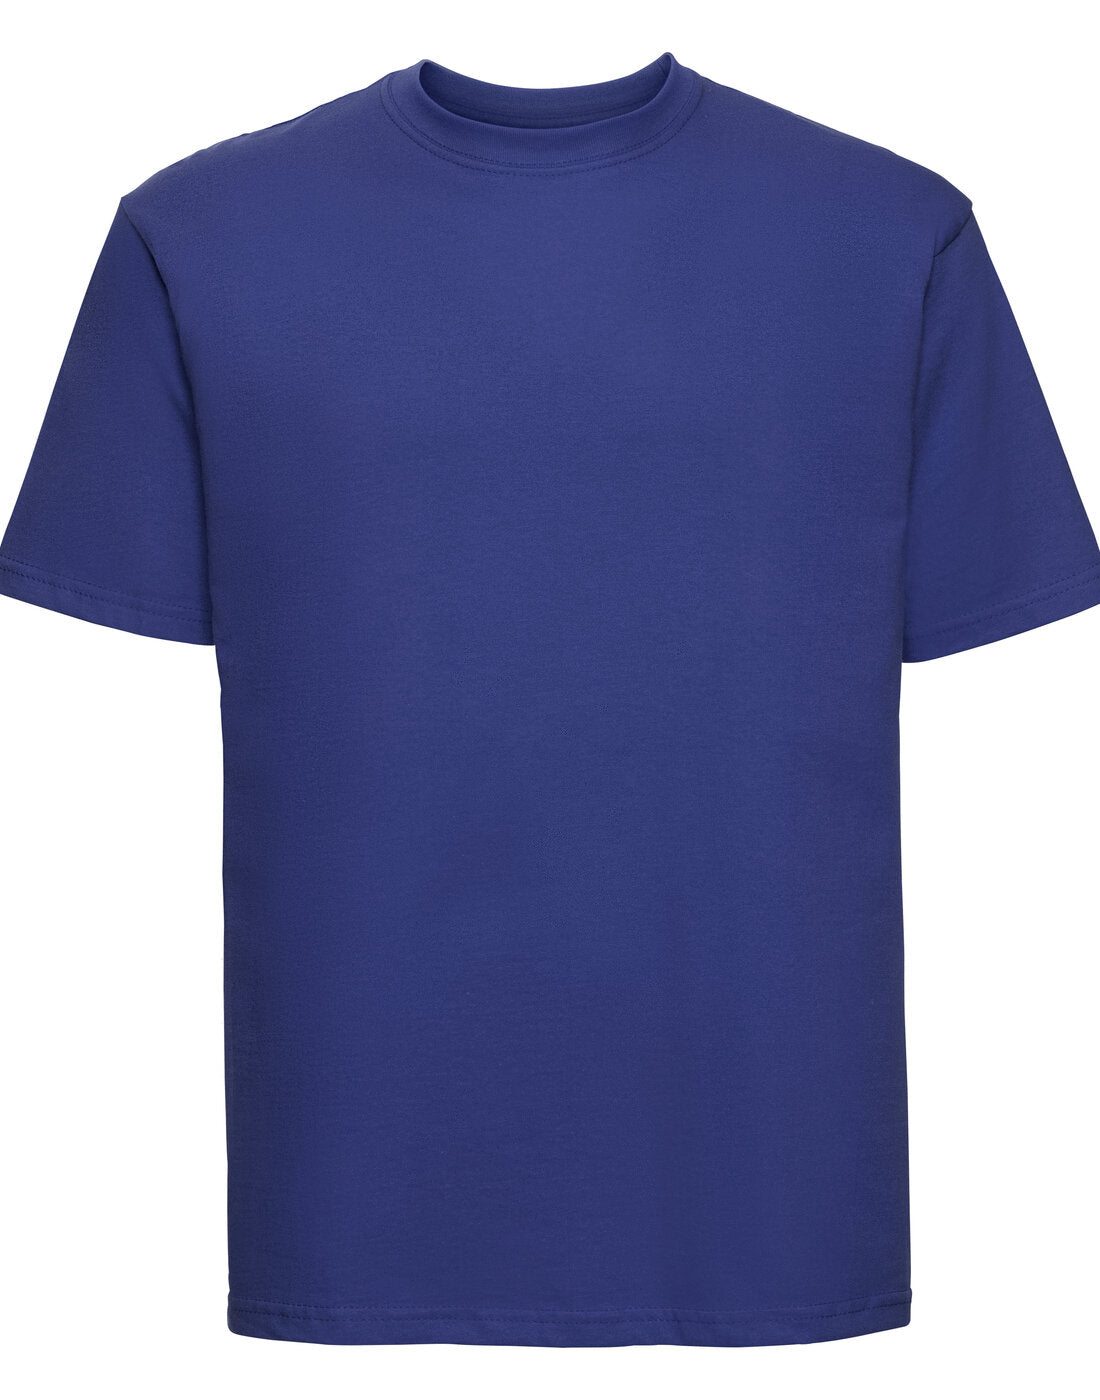 Russell Classic Unisex T-Shirt - Bright Royal